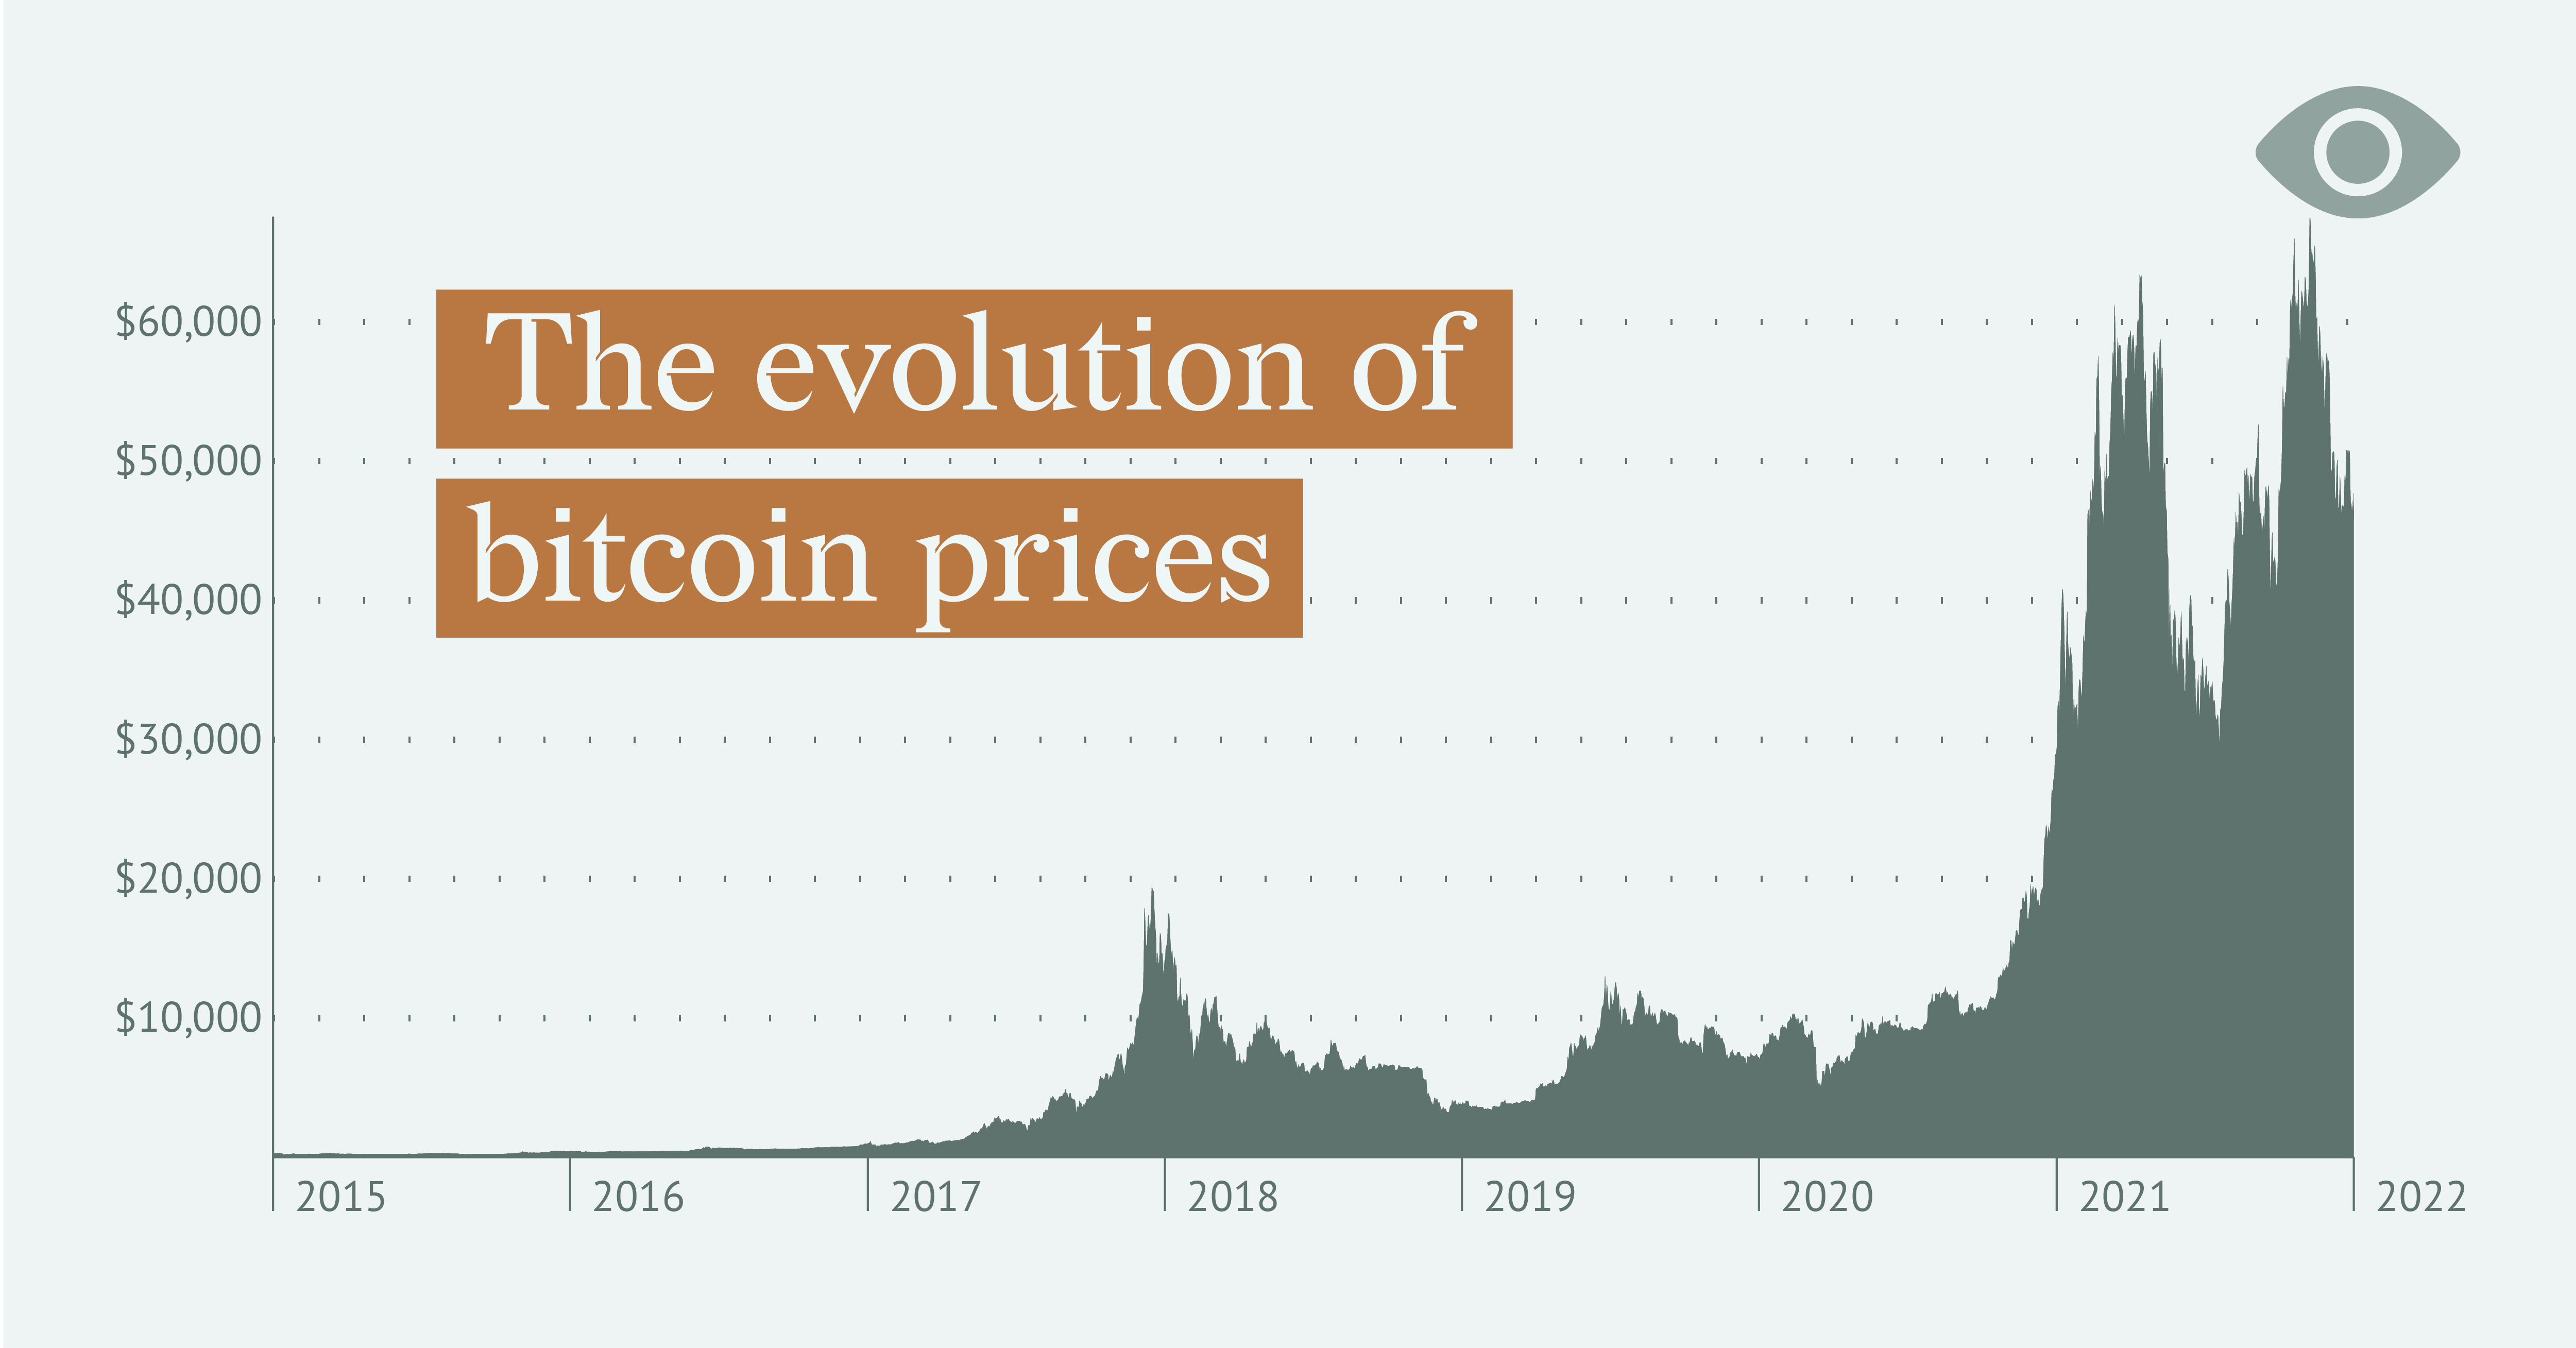 The illustration shows an area chart displaying the evolution of bitcoin prices between 2015 and 2022. The title of the chart is highlighted in brown, in contrast to the rest of the chart being in two shades of green.